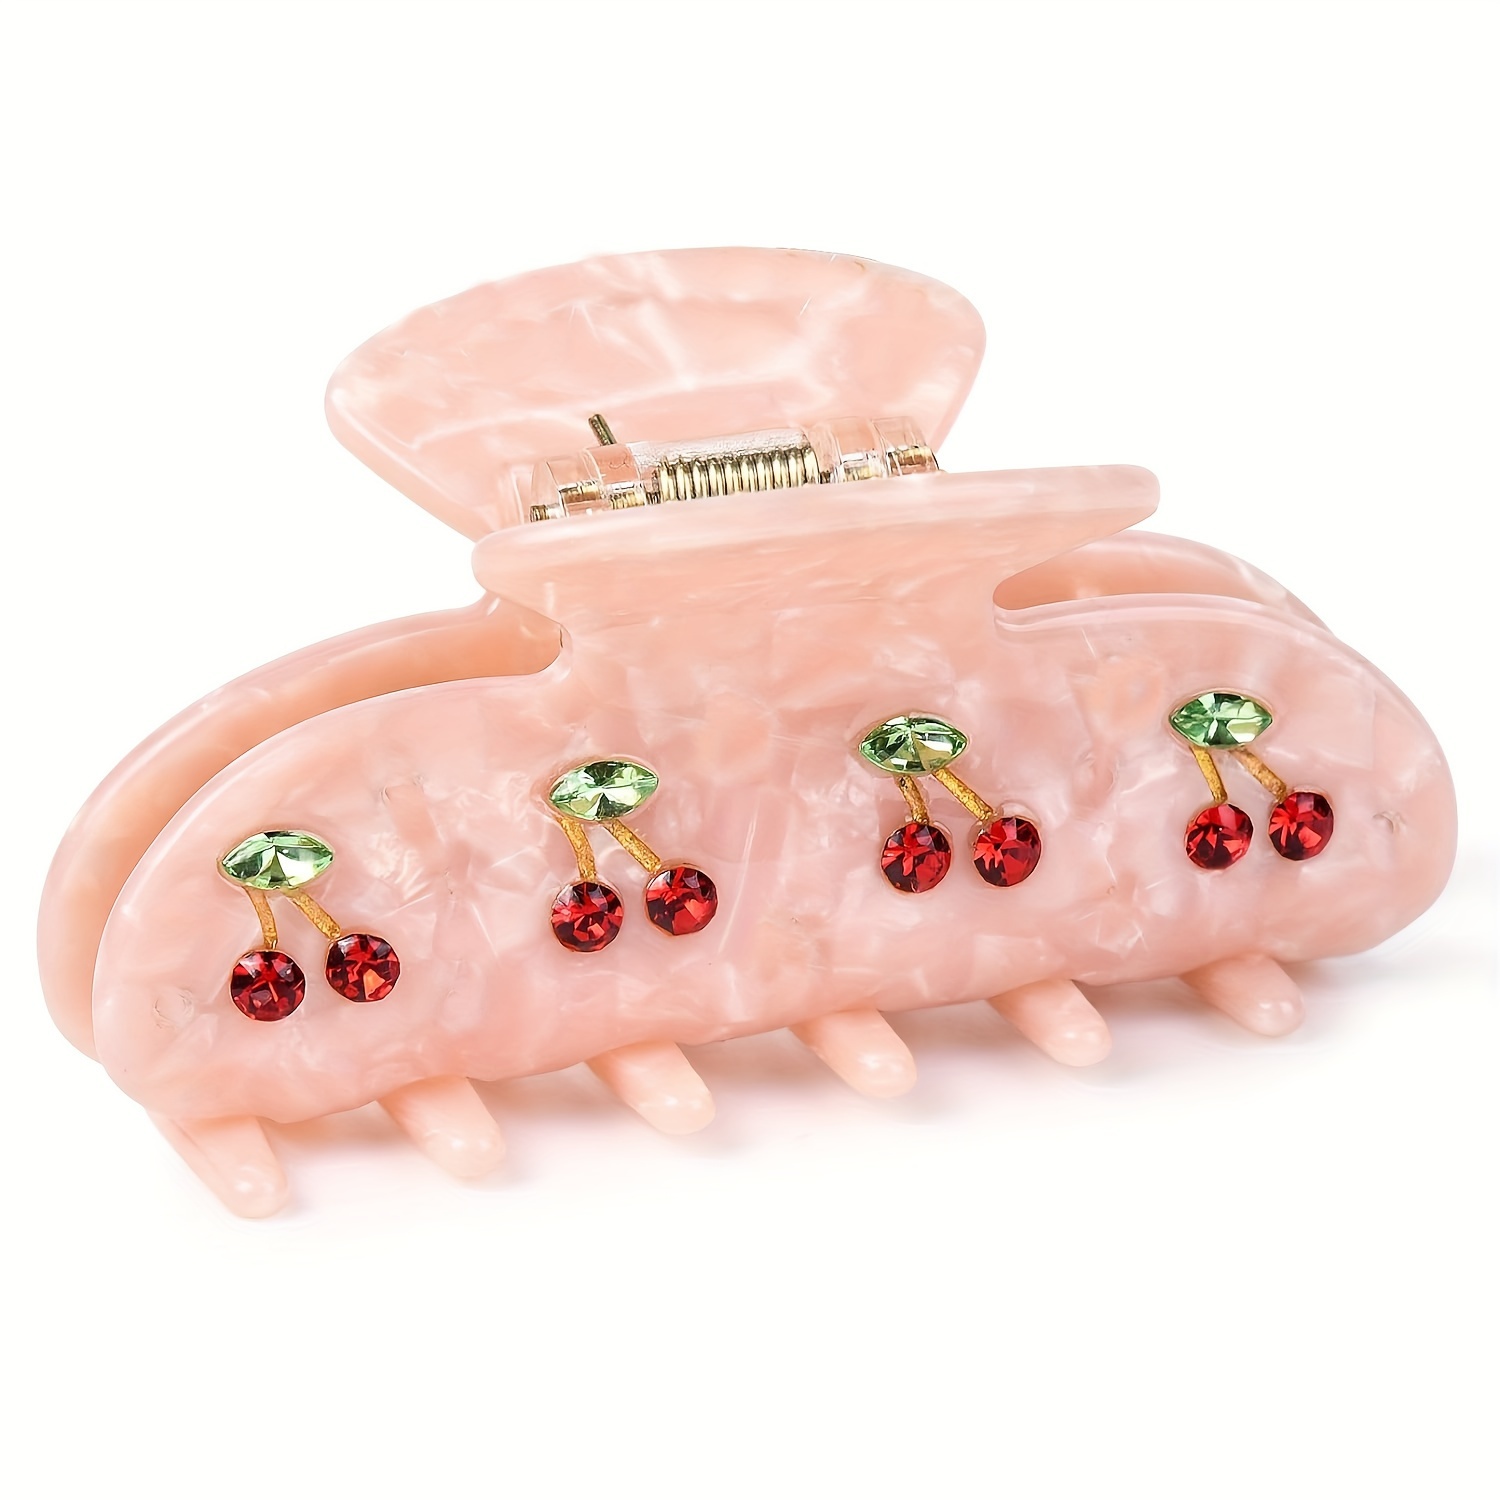 

Retro Sparkling Rhinestone Cherry Decorative Hair Claw Clip Large Non Slip Hair Grab Clip For Women And Daily Use